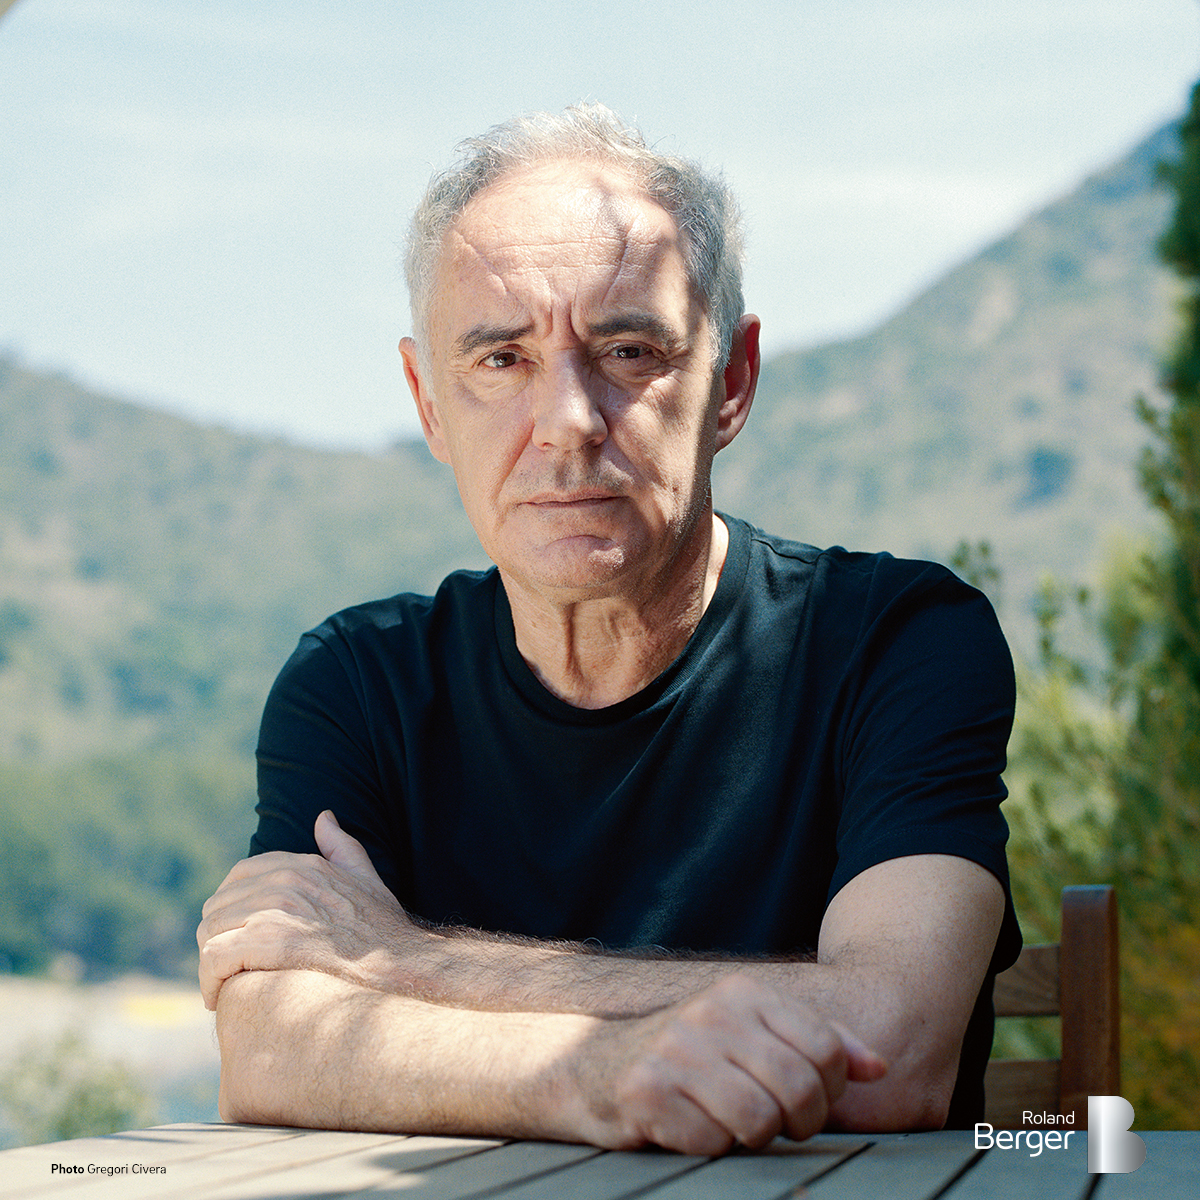 How three-Michelin-starred chef @ferranadria, the pioneer of the renowned @elBulli_oficial, has completely reimagined the gastronomic world. Get inspired by his #innovative and #experimental approach: https://t.co/GlbvYOXdfS https://t.co/NhkaVIX6rn